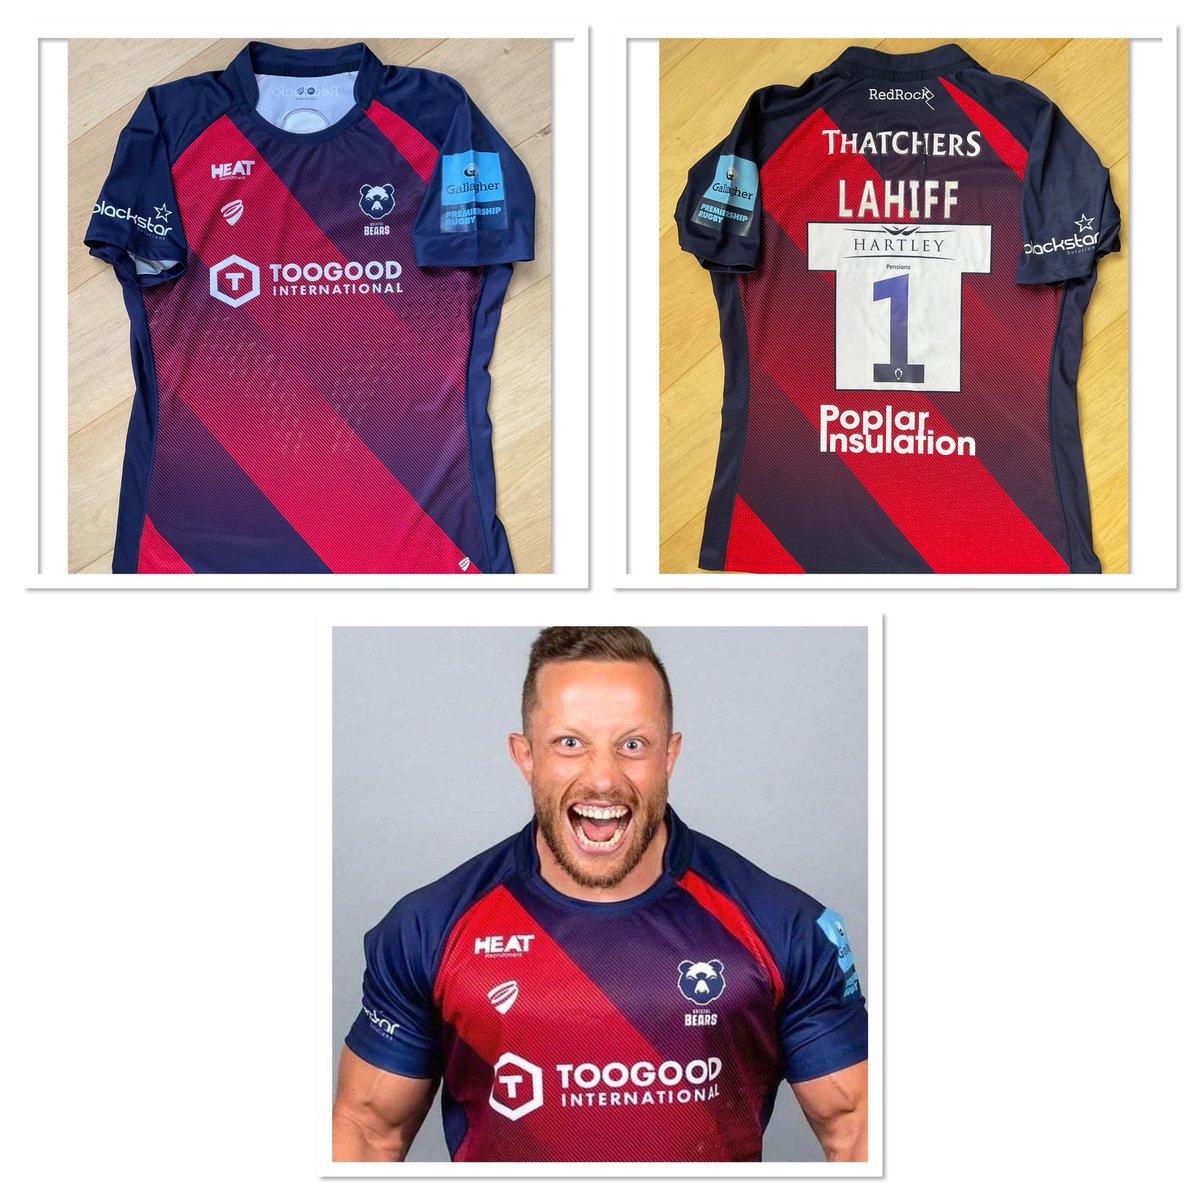 The man, the legend…the match shirt. Our auction for @LahiffMax @BristolBears match shirt ends in just 3 hours. Details and to place your bid, follow the link inmylocker.co.uk/pages/products… Please only bid what you can afford.